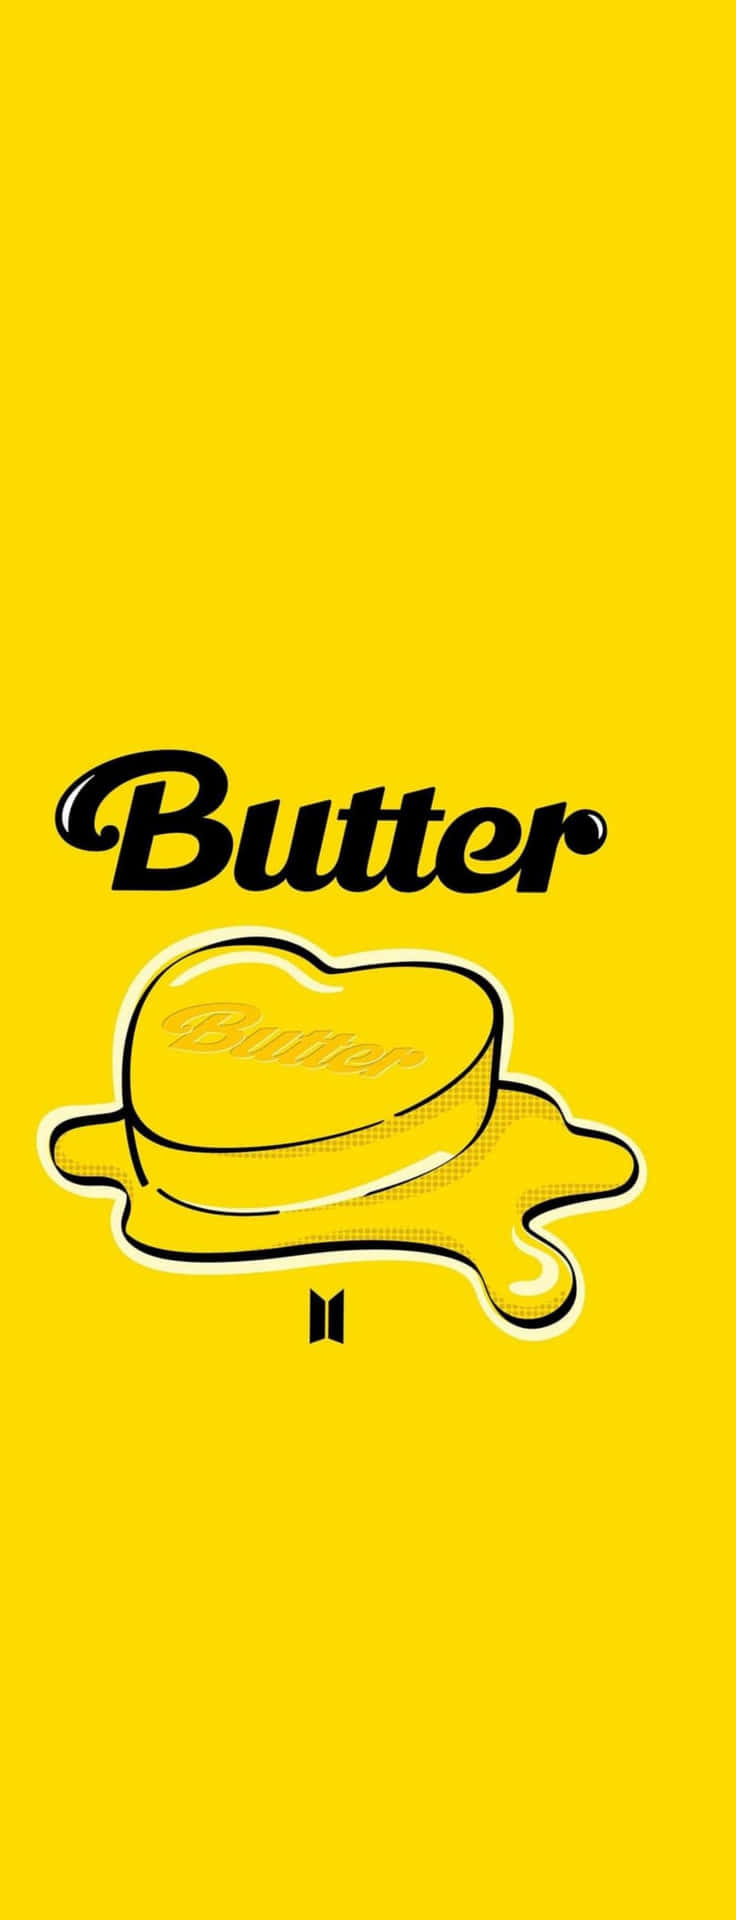 BTS Celebrates the Launch of their Single 'Butter'